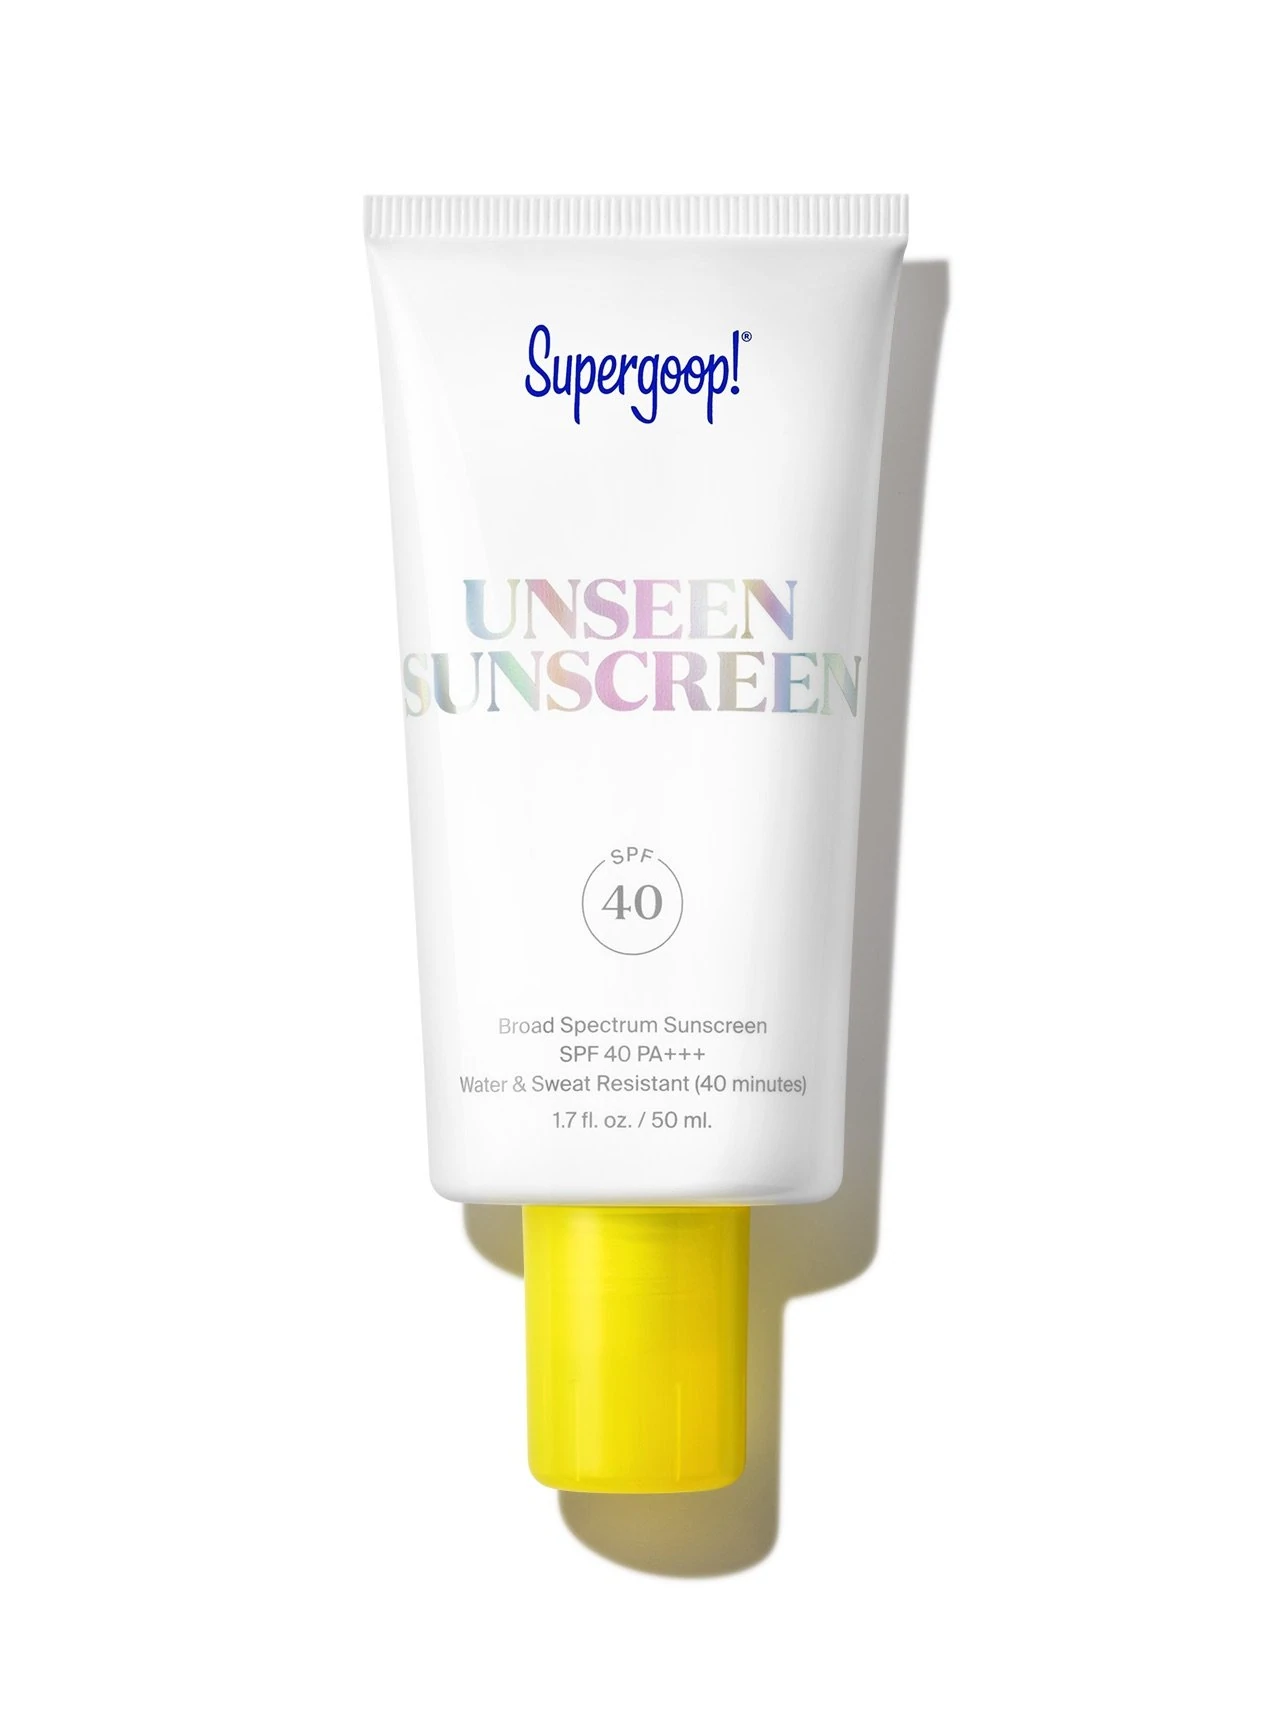 FEMMENORDIC's choice in the Supergoop vs COOLA sunscreen comparison, the Supergoop Unseen Sunscreen